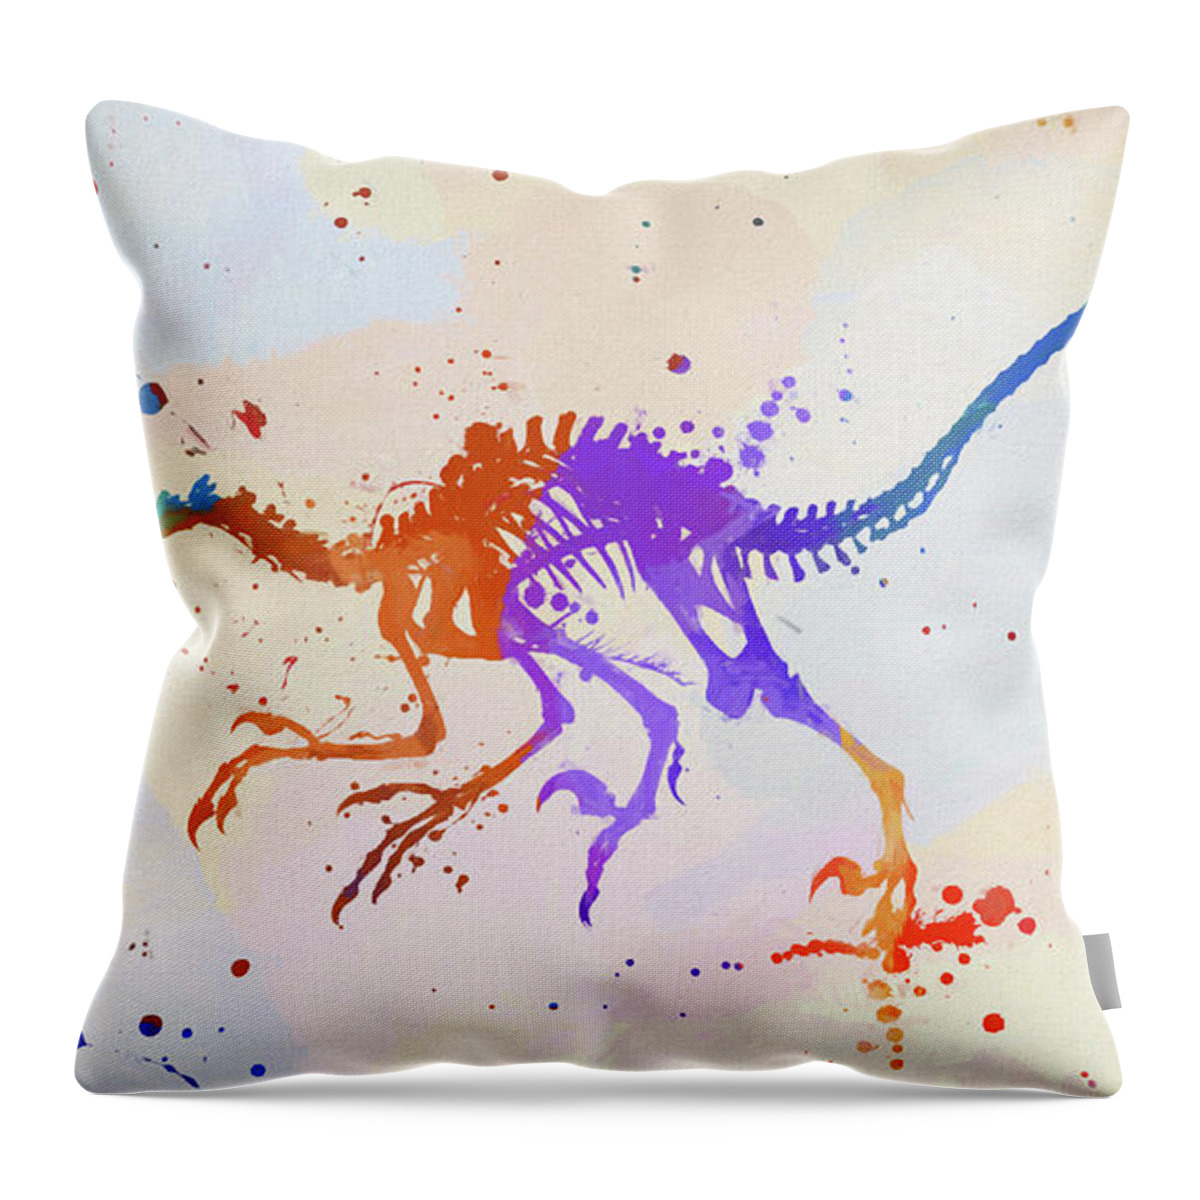 Raptor Color Splash Throw Pillow featuring the painting Raptor Color Splash by Dan Sproul